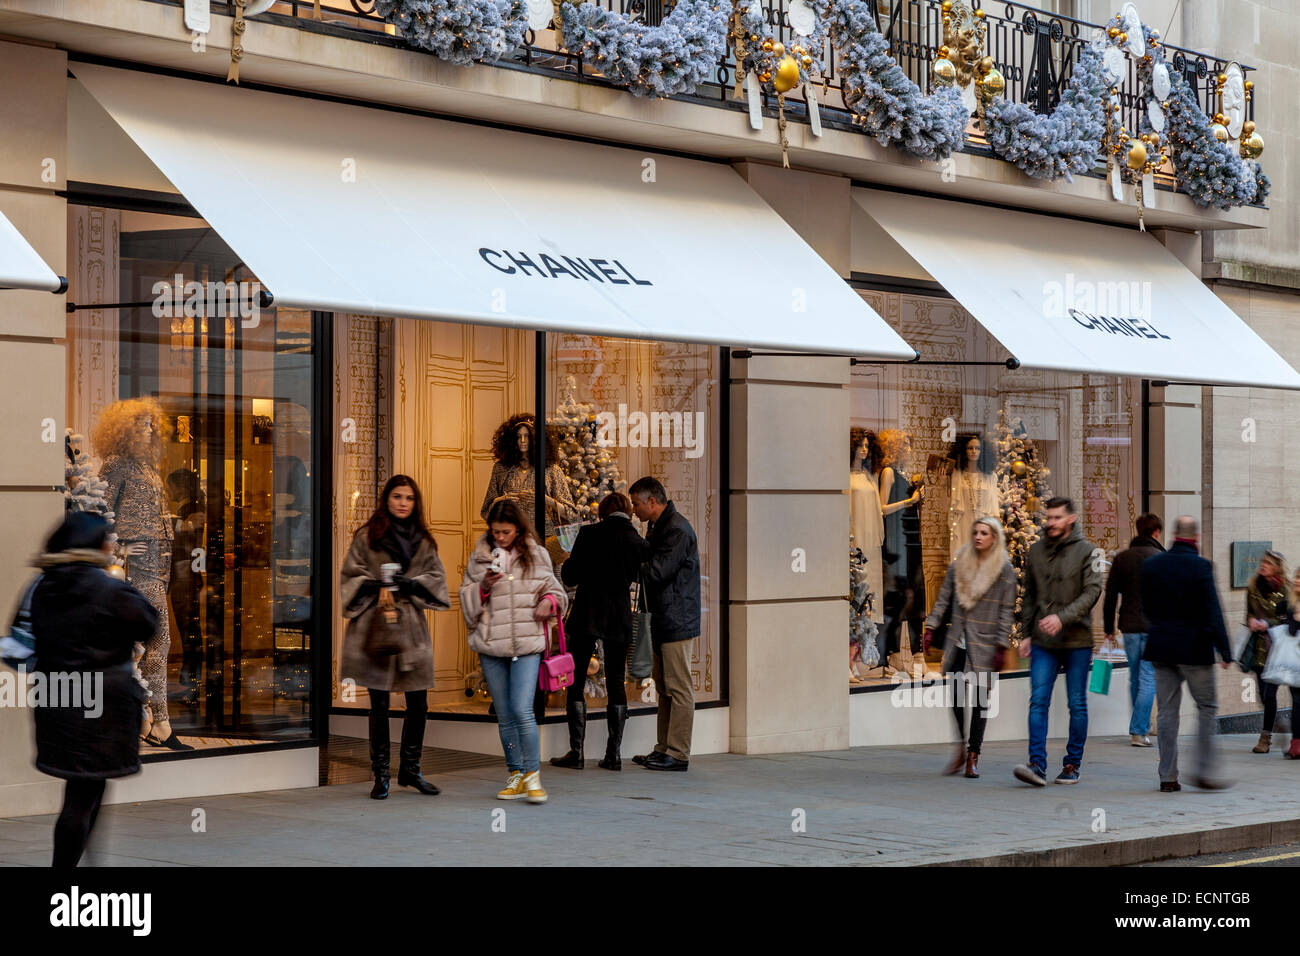 Chanel Boutique High Resolution Stock Photography and Images - Alamy